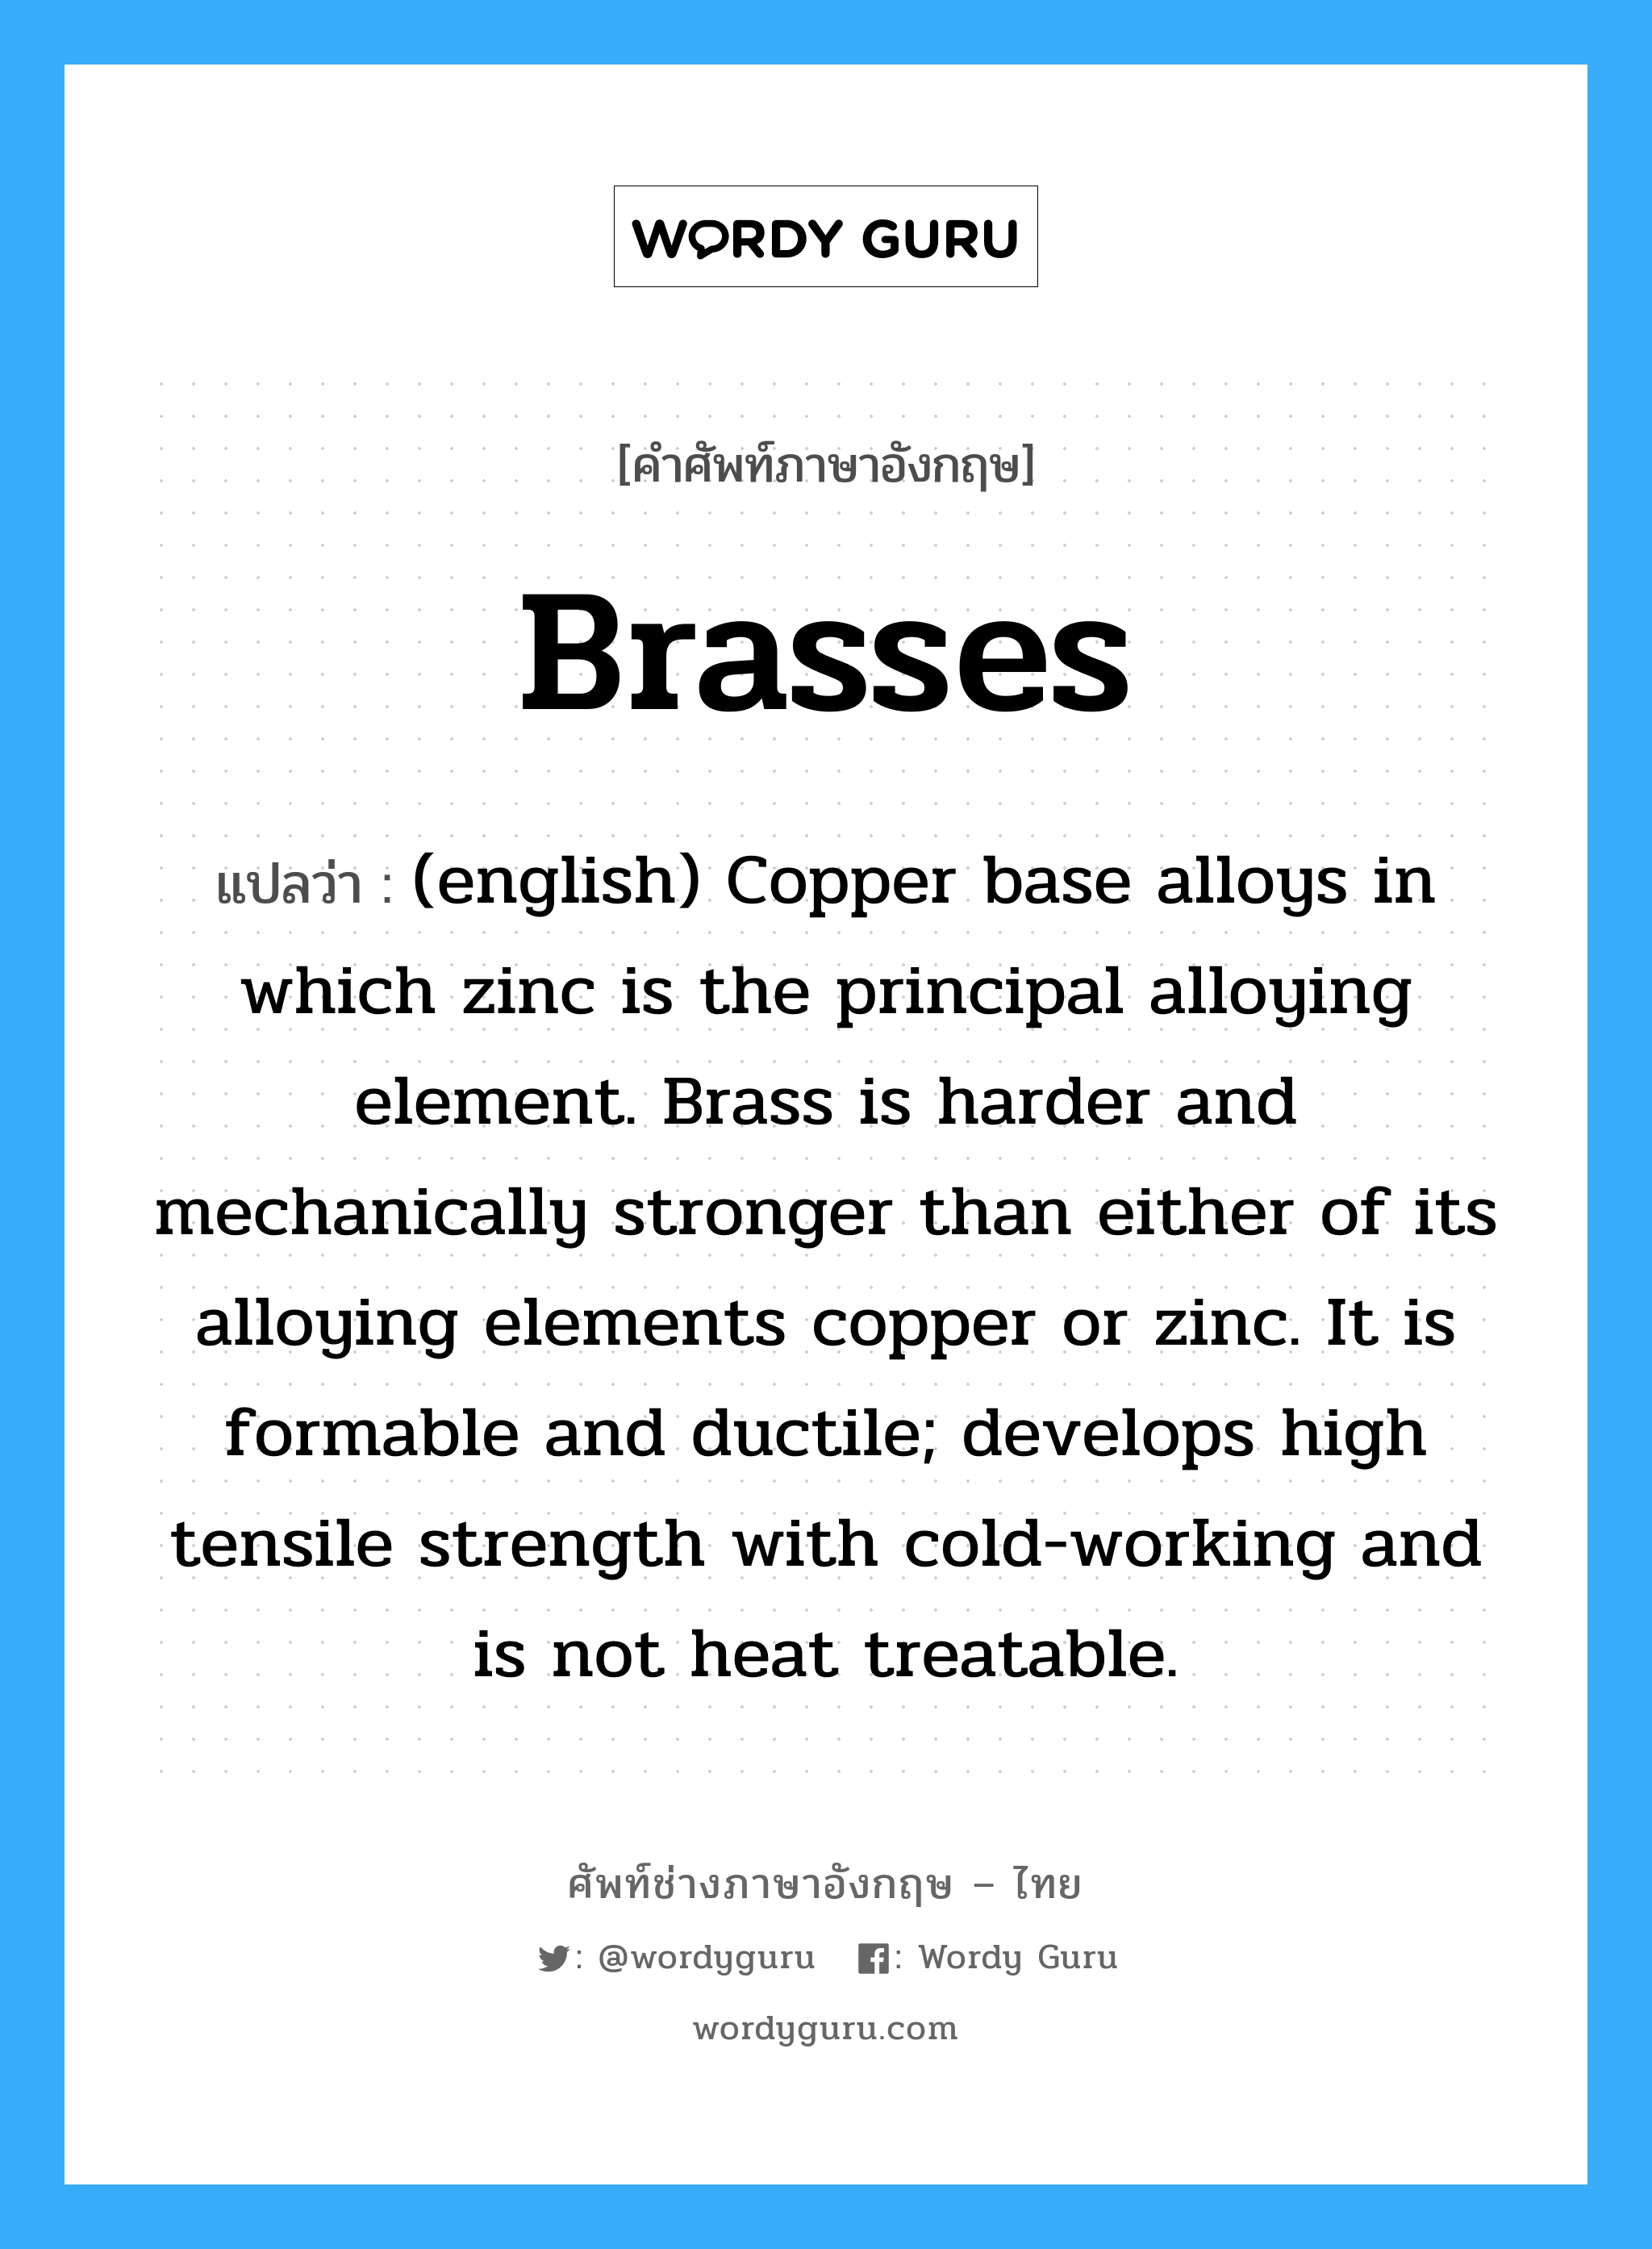 Brasses แปลว่า?, คำศัพท์ช่างภาษาอังกฤษ - ไทย Brasses คำศัพท์ภาษาอังกฤษ Brasses แปลว่า (english) Copper base alloys in which zinc is the principal alloying element. Brass is harder and mechanically stronger than either of its alloying elements copper or zinc. It is formable and ductile; develops high tensile strength with cold-working and is not heat treatable.